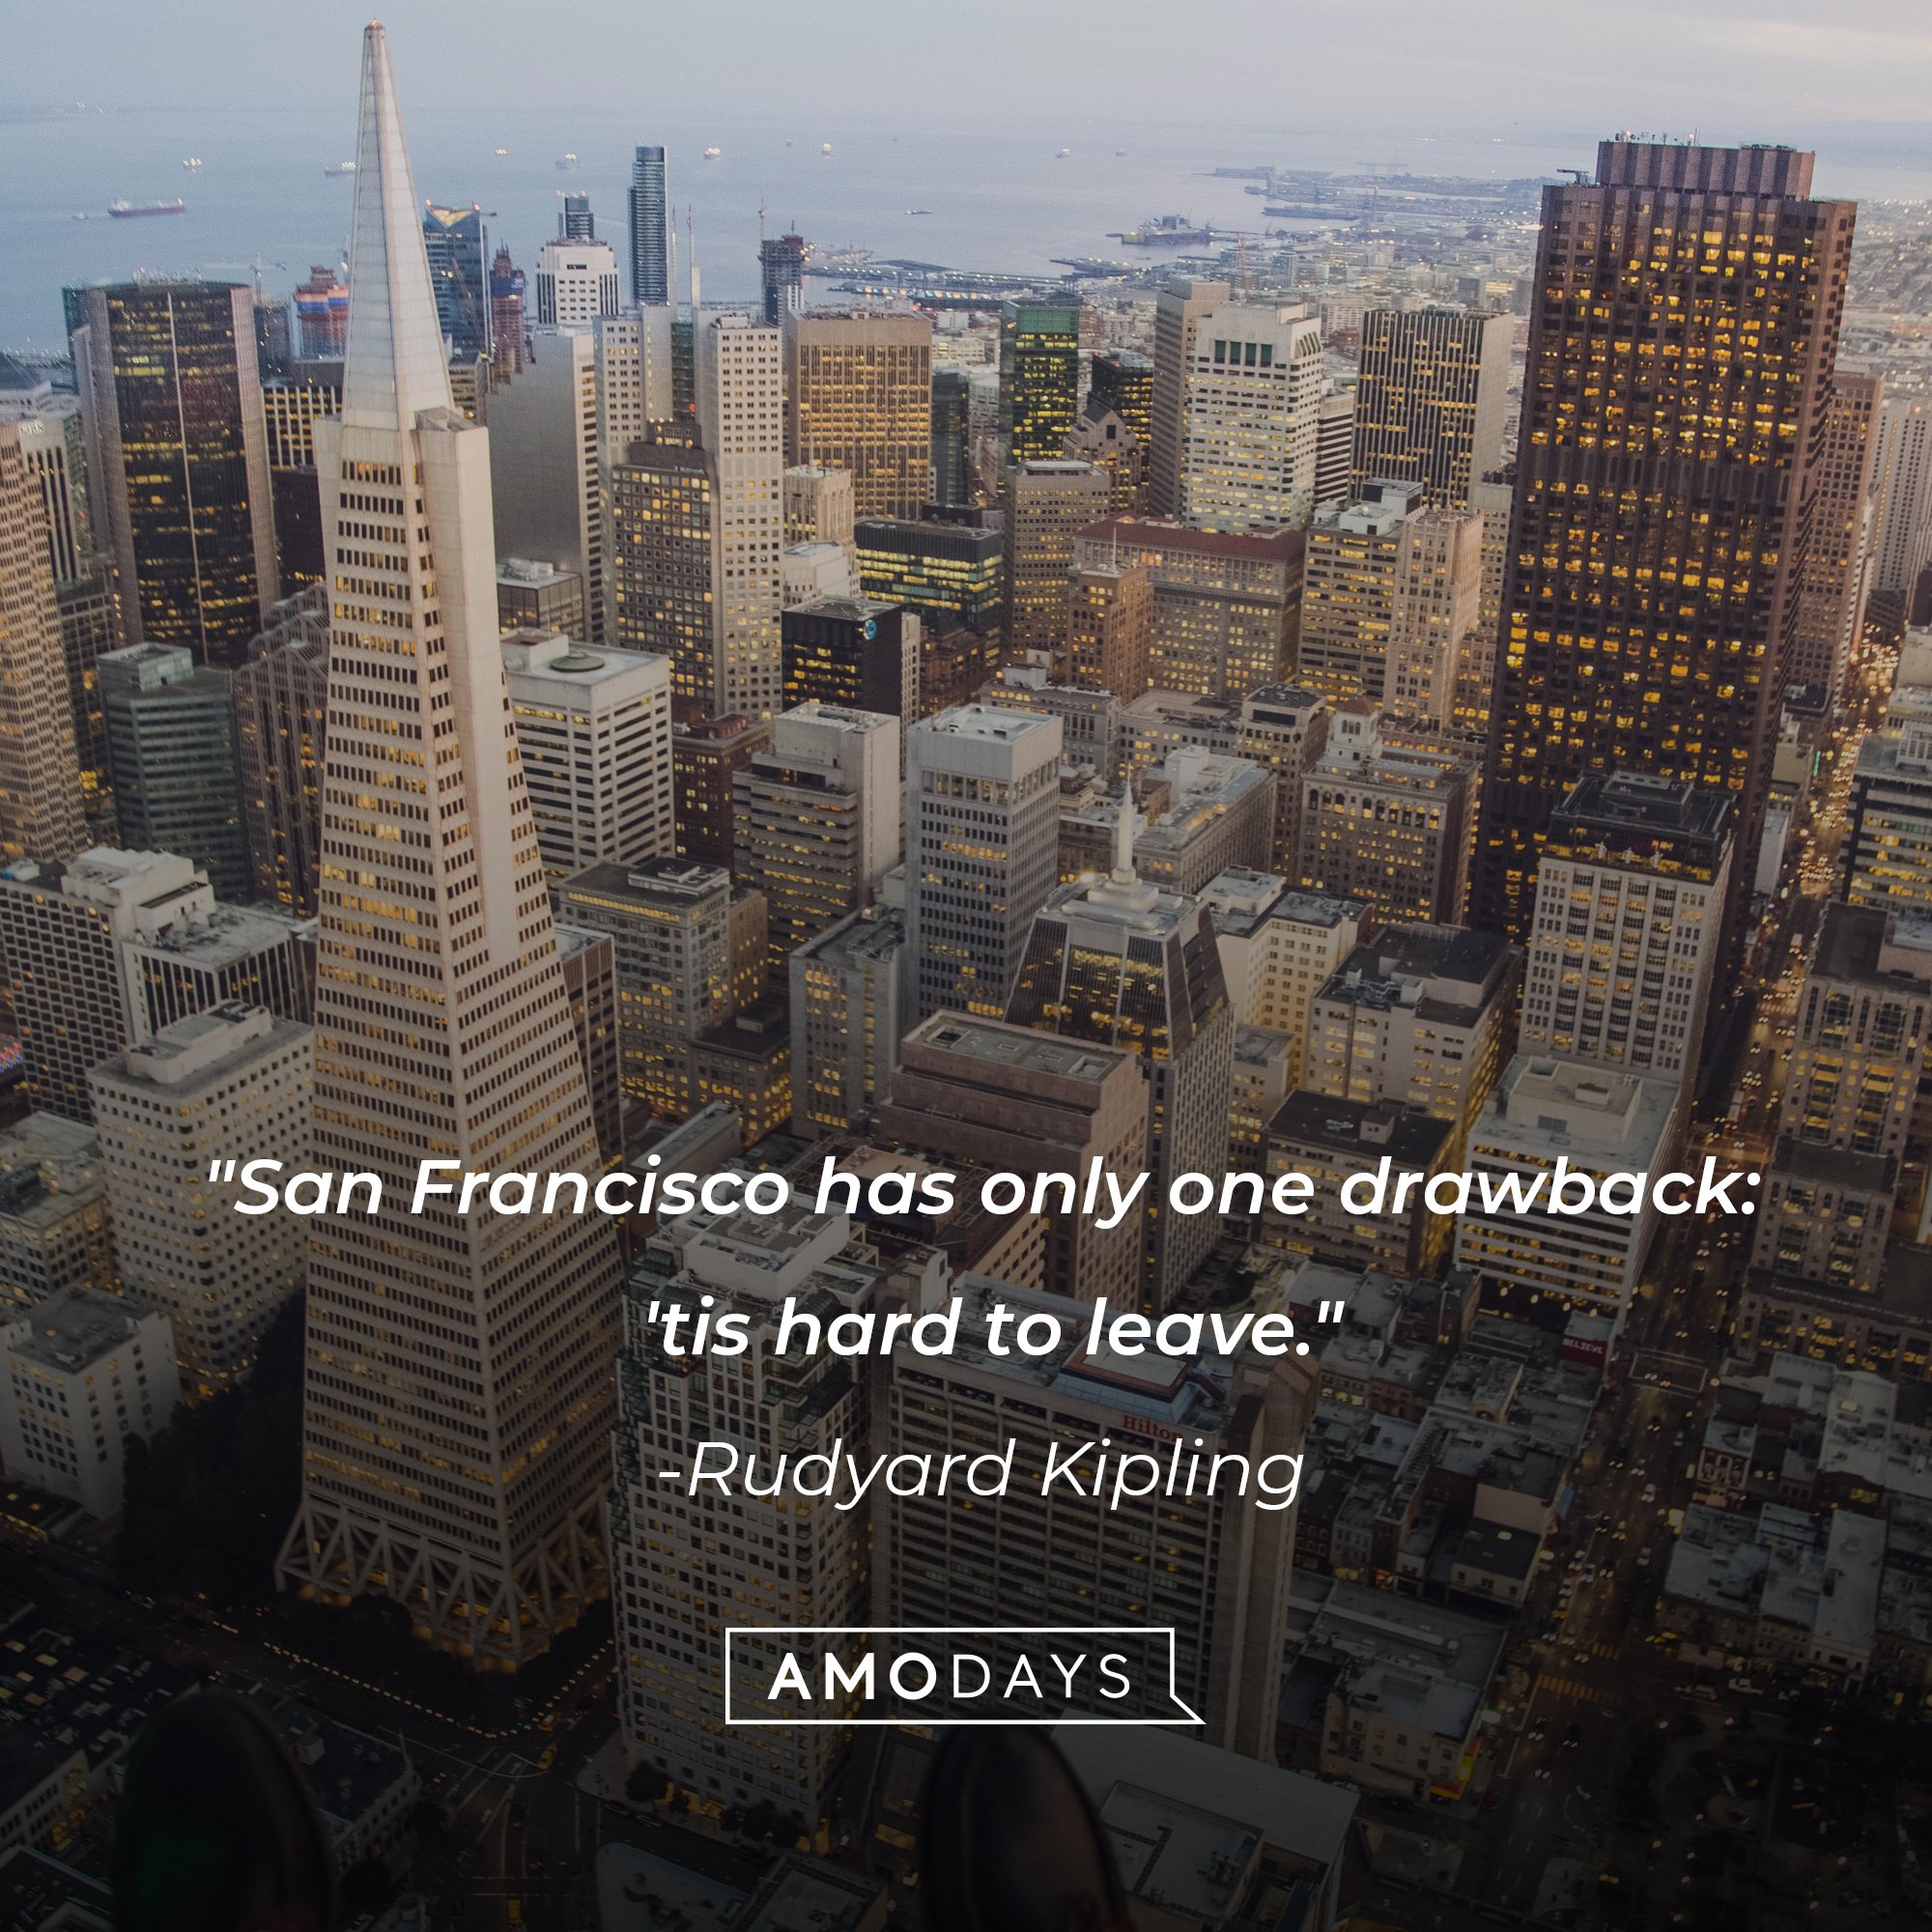 Rudyard Kipling’s quote: "San Francisco has only one drawback: 'tis hard to leave."  | Image: AmoDays